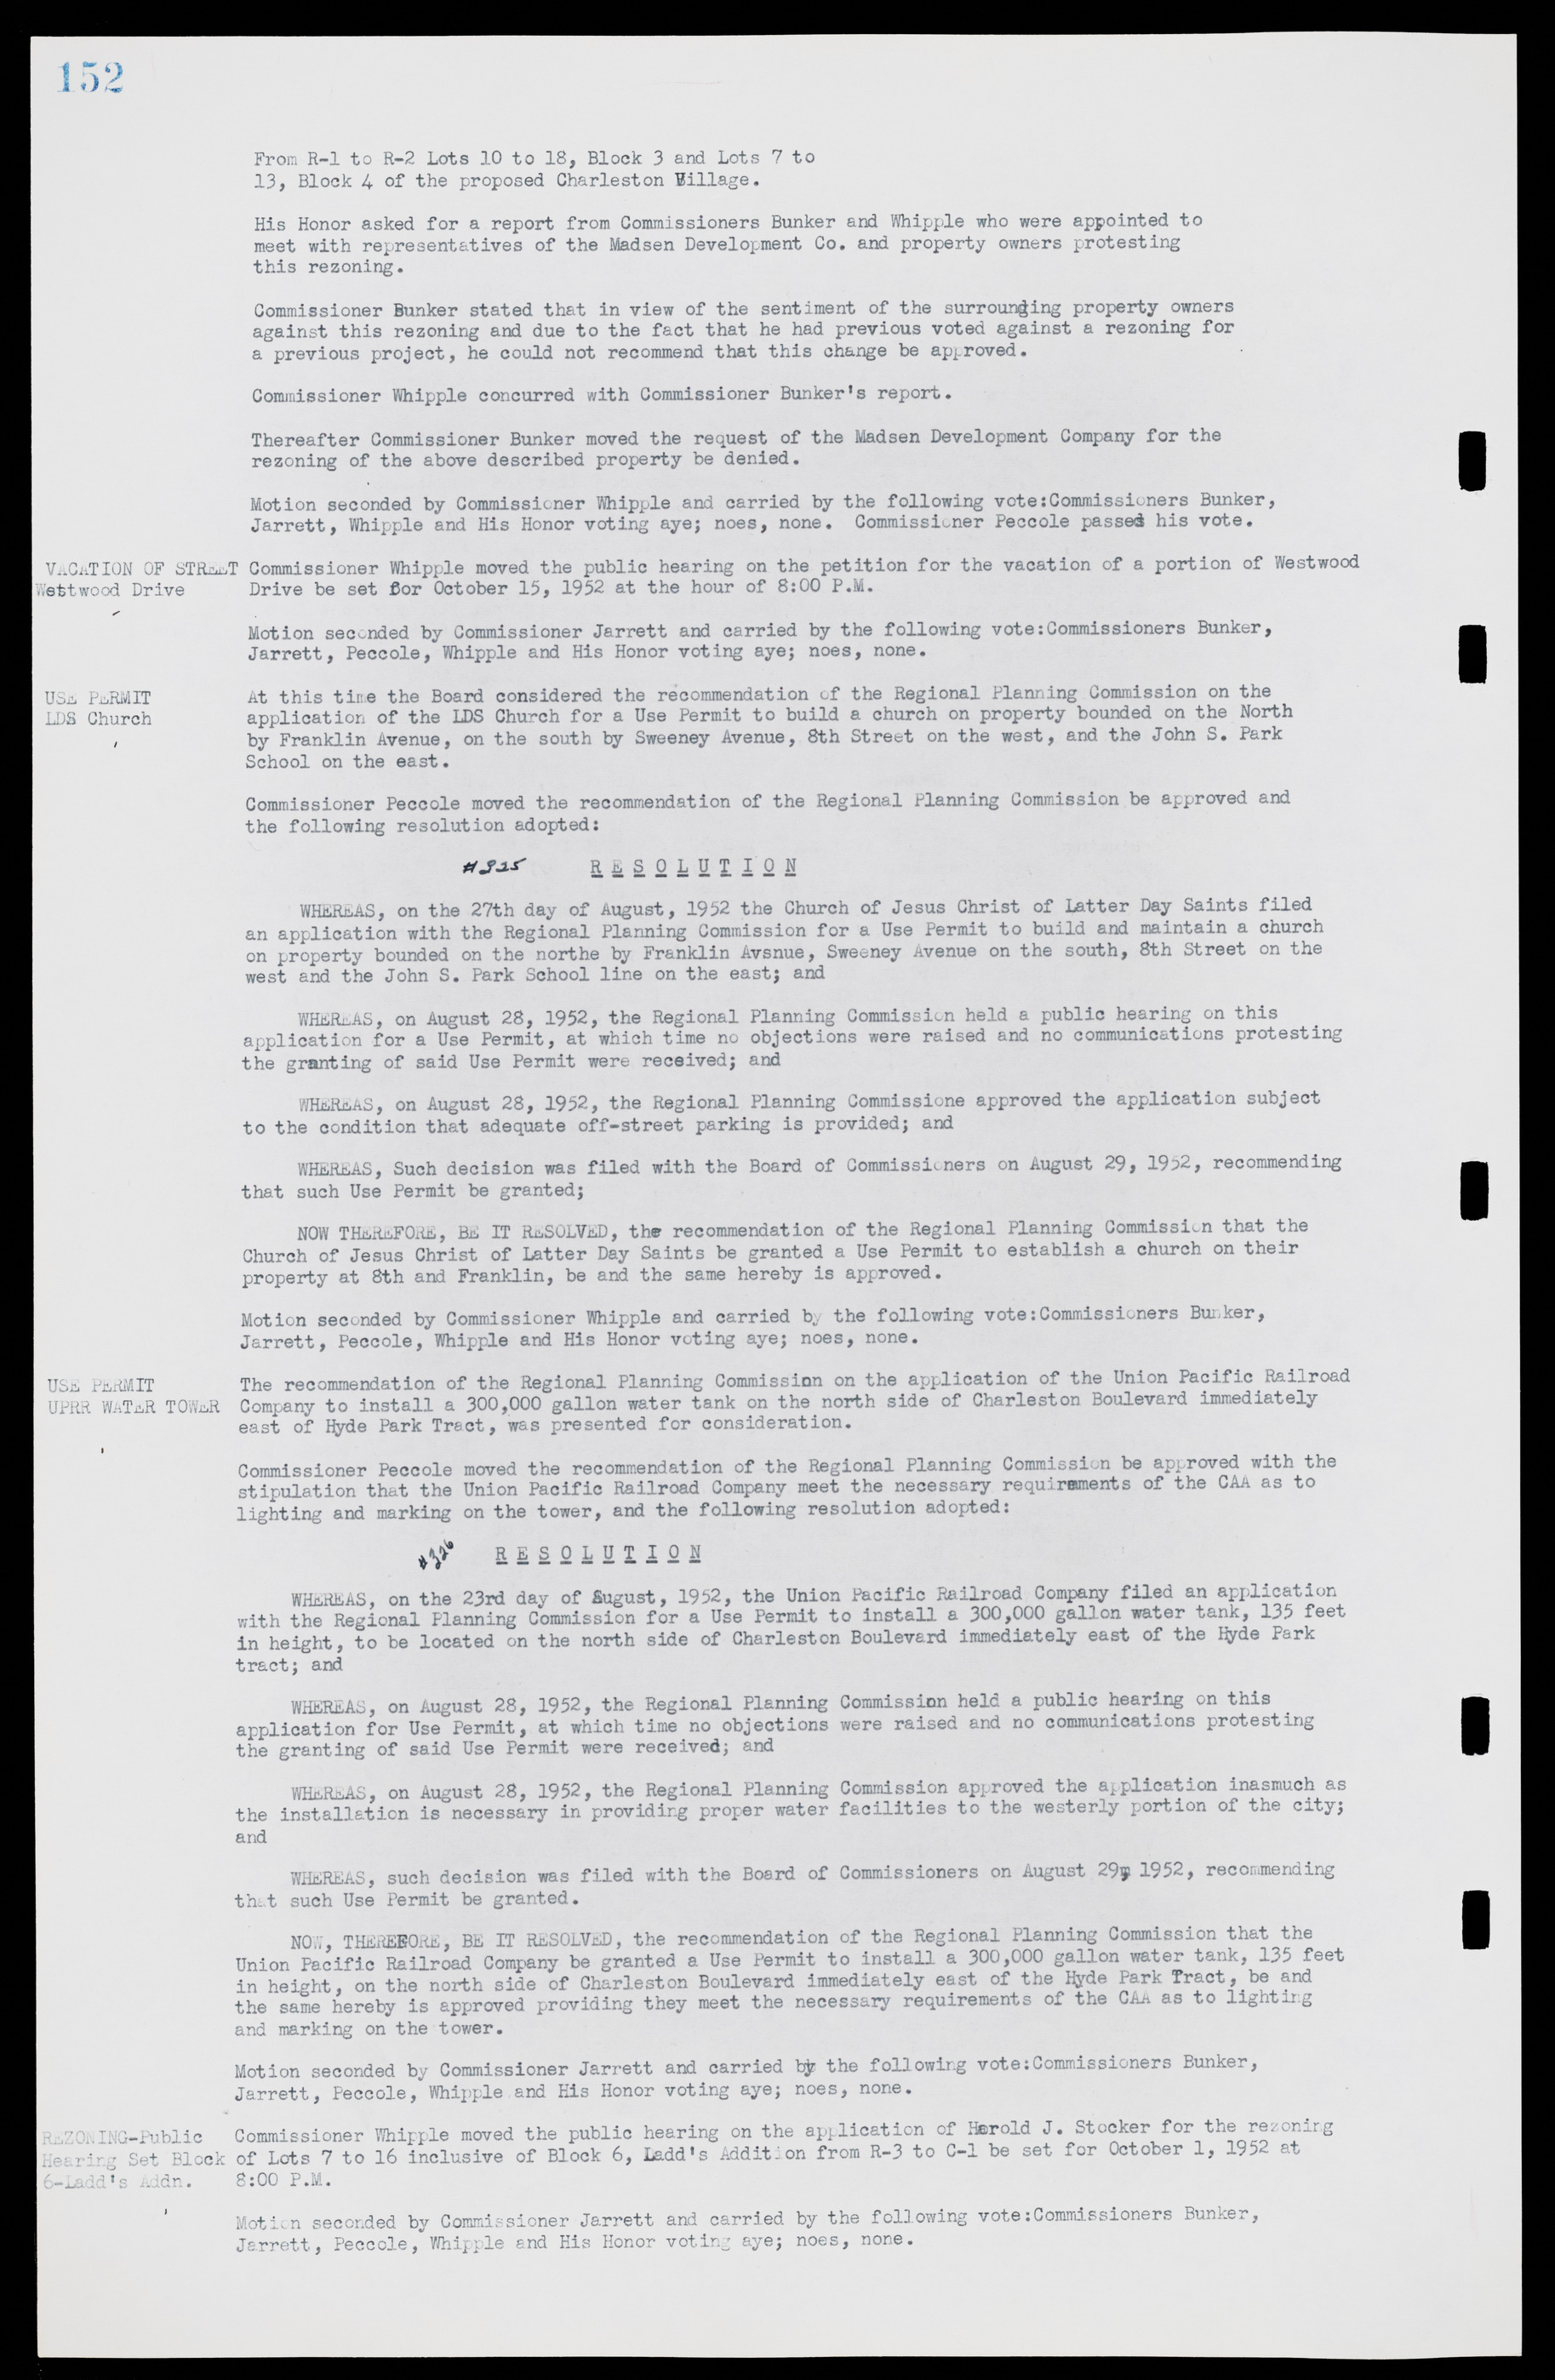 Las Vegas City Commission Minutes, May 26, 1952 to February 17, 1954, lvc000008-166